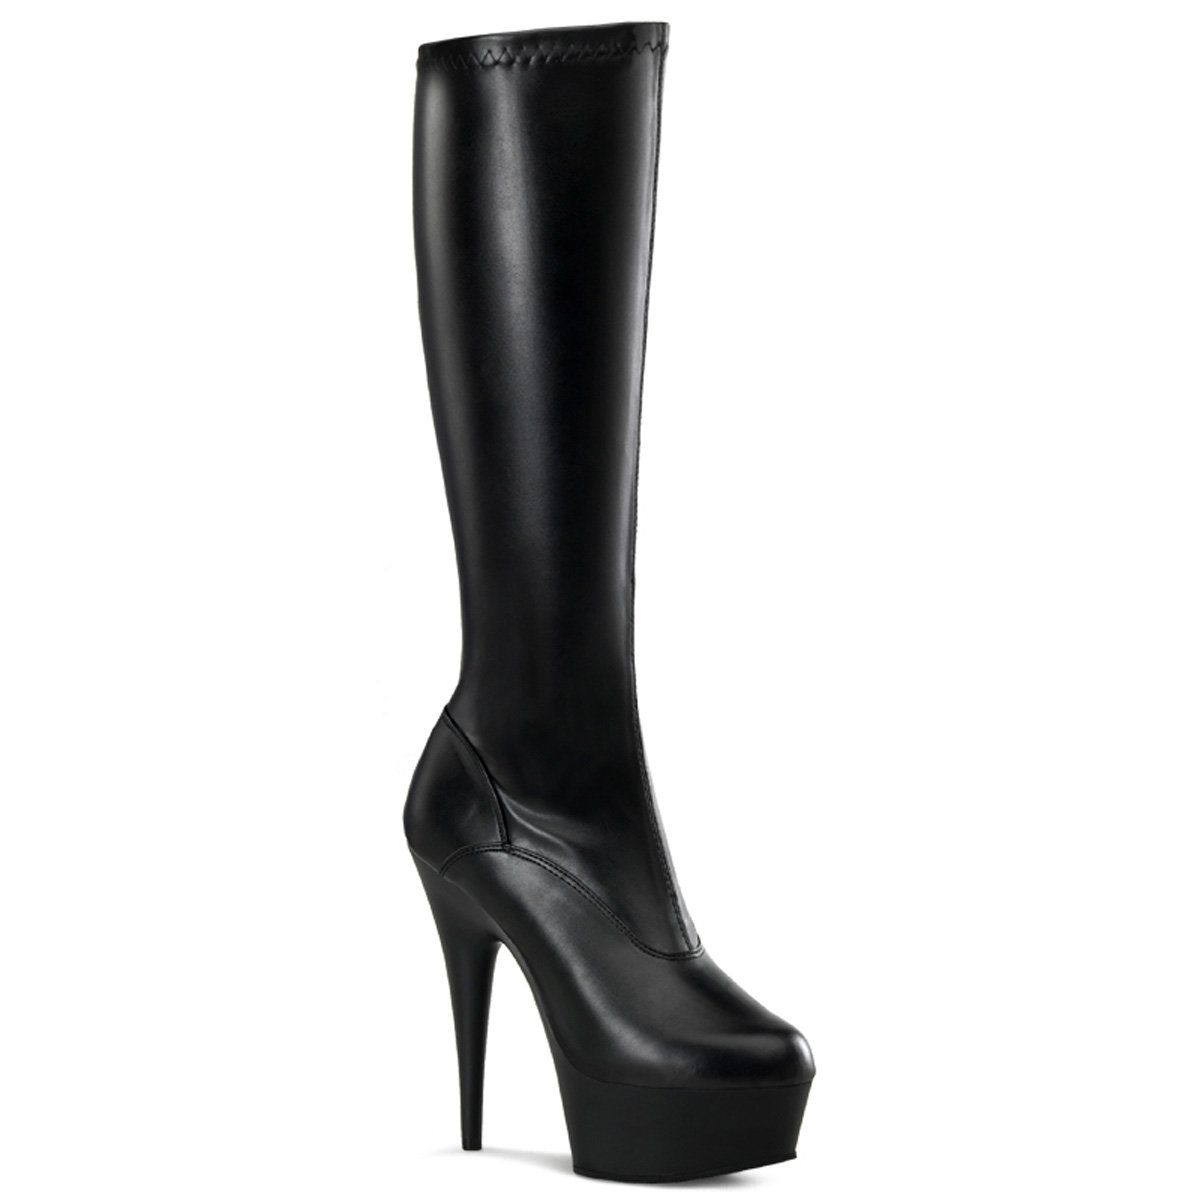 DELIGHT-2000 Black Stretch Faux Leather Knee Boot Pleaser